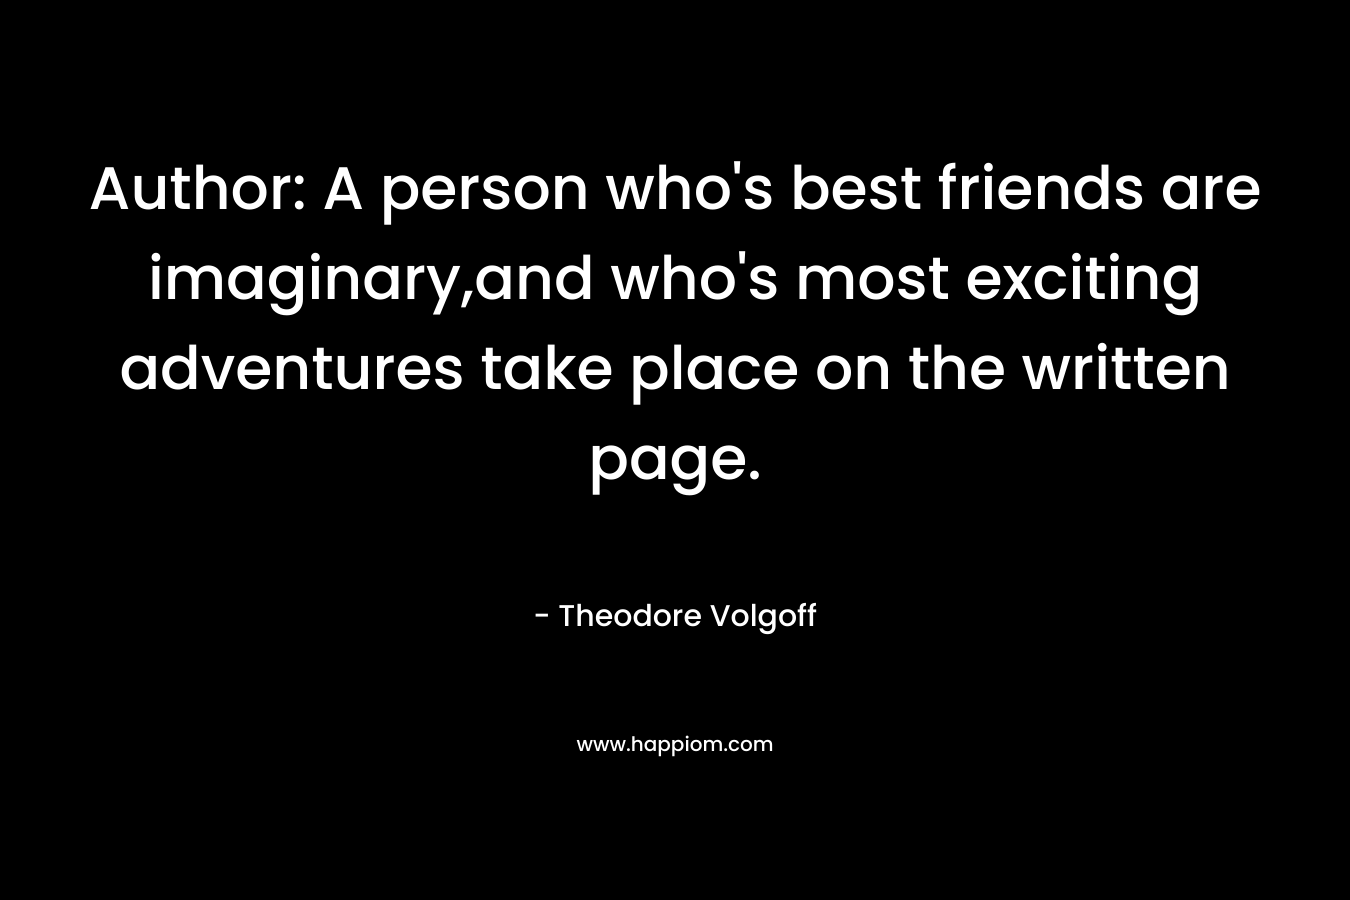 Author: A person who’s best friends are imaginary,and who’s most exciting adventures take place on the written page. – Theodore Volgoff